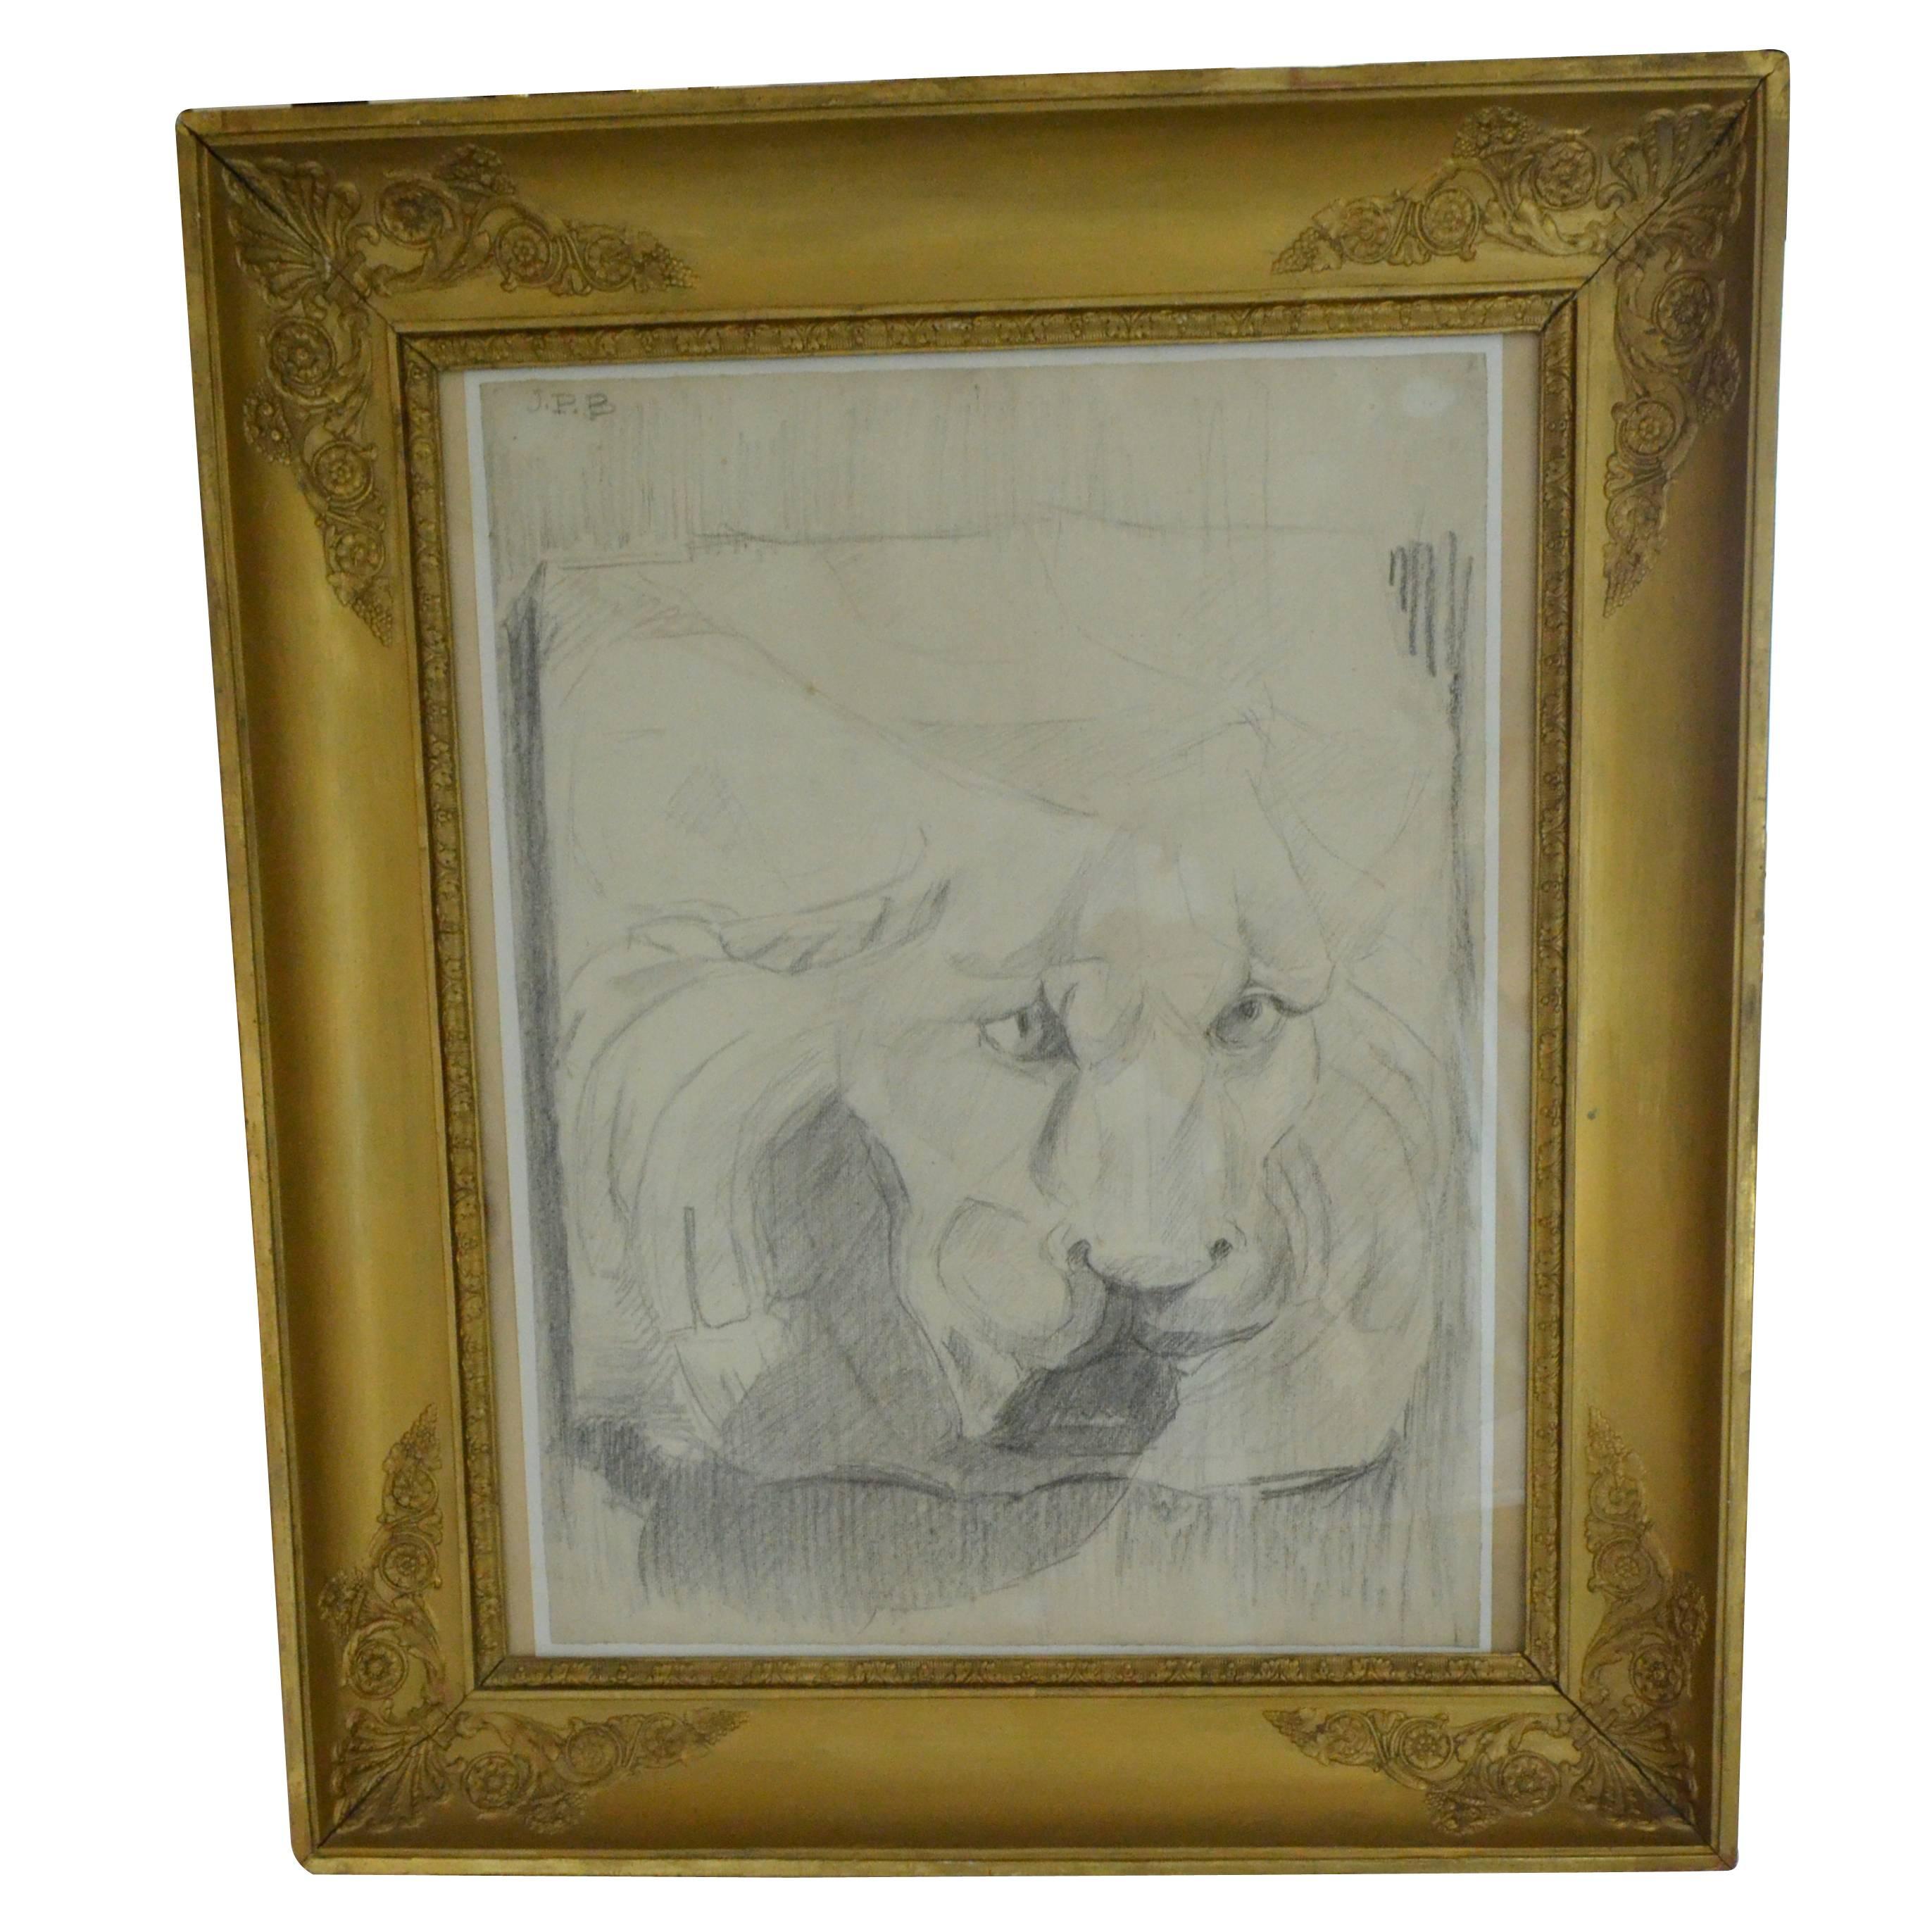 Lion Charcoal Drawing, Empire Gold Foil Frame